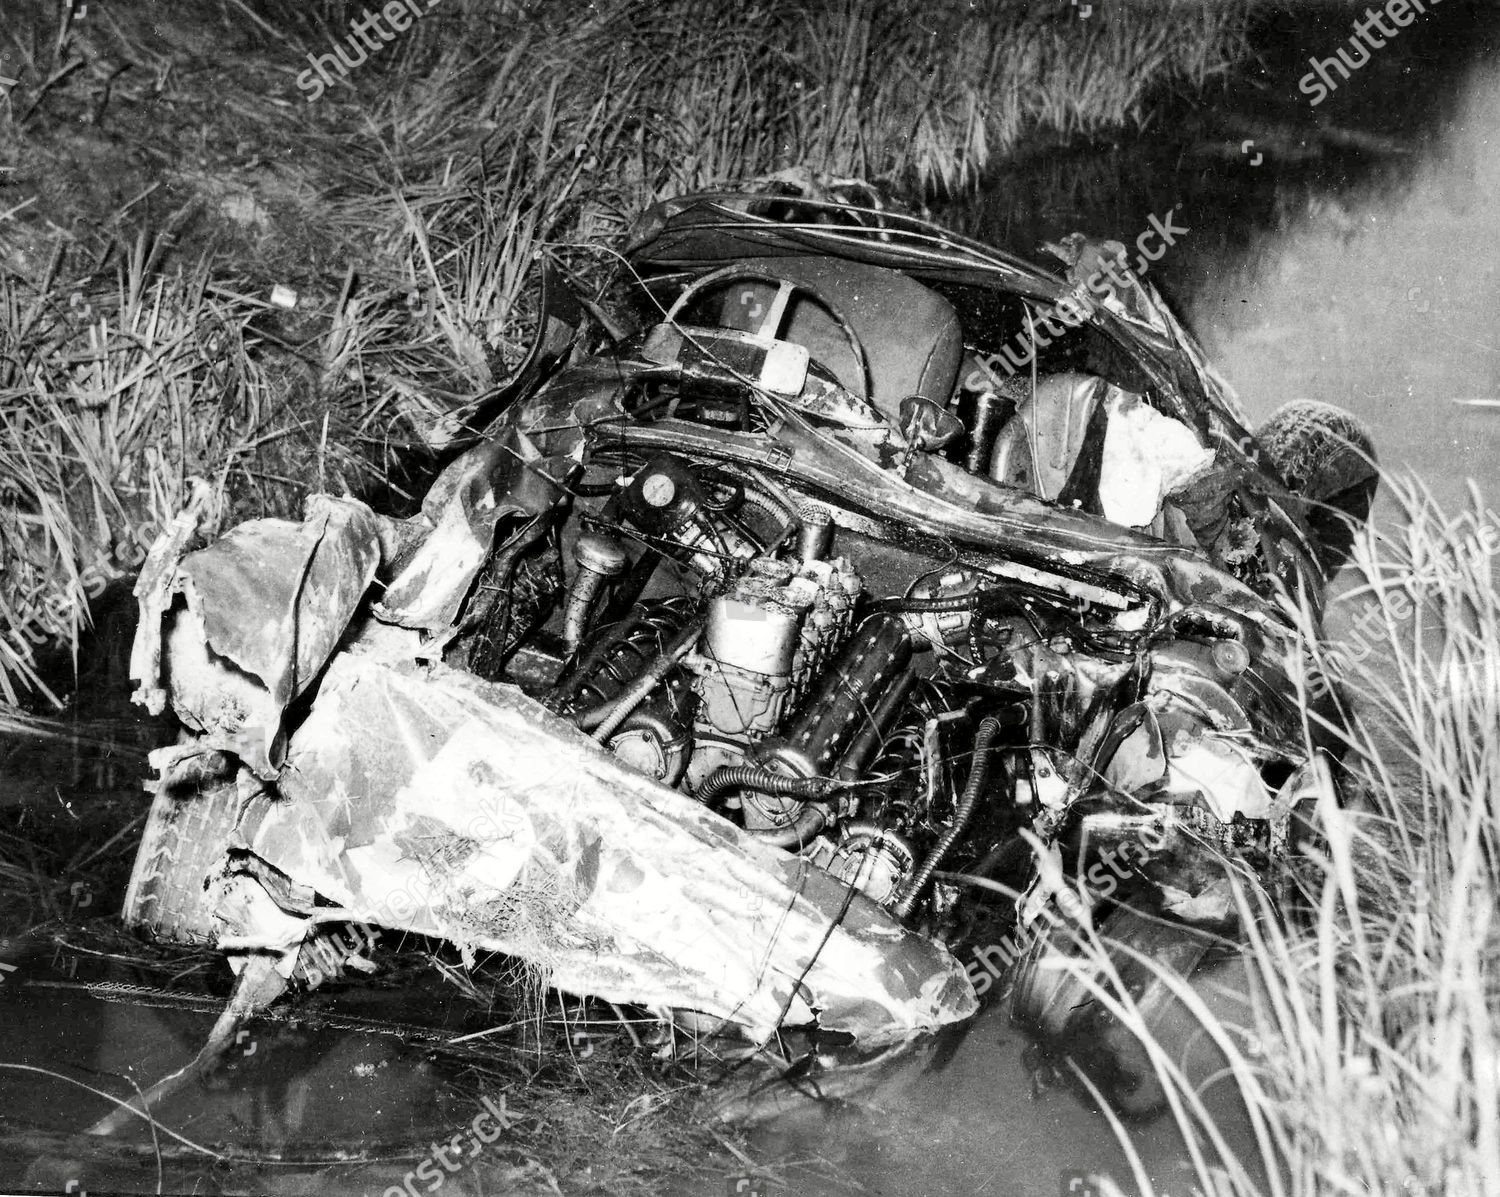 Alfonso de Portago's car after his fatal accident at the Mille Miglia in 1957.